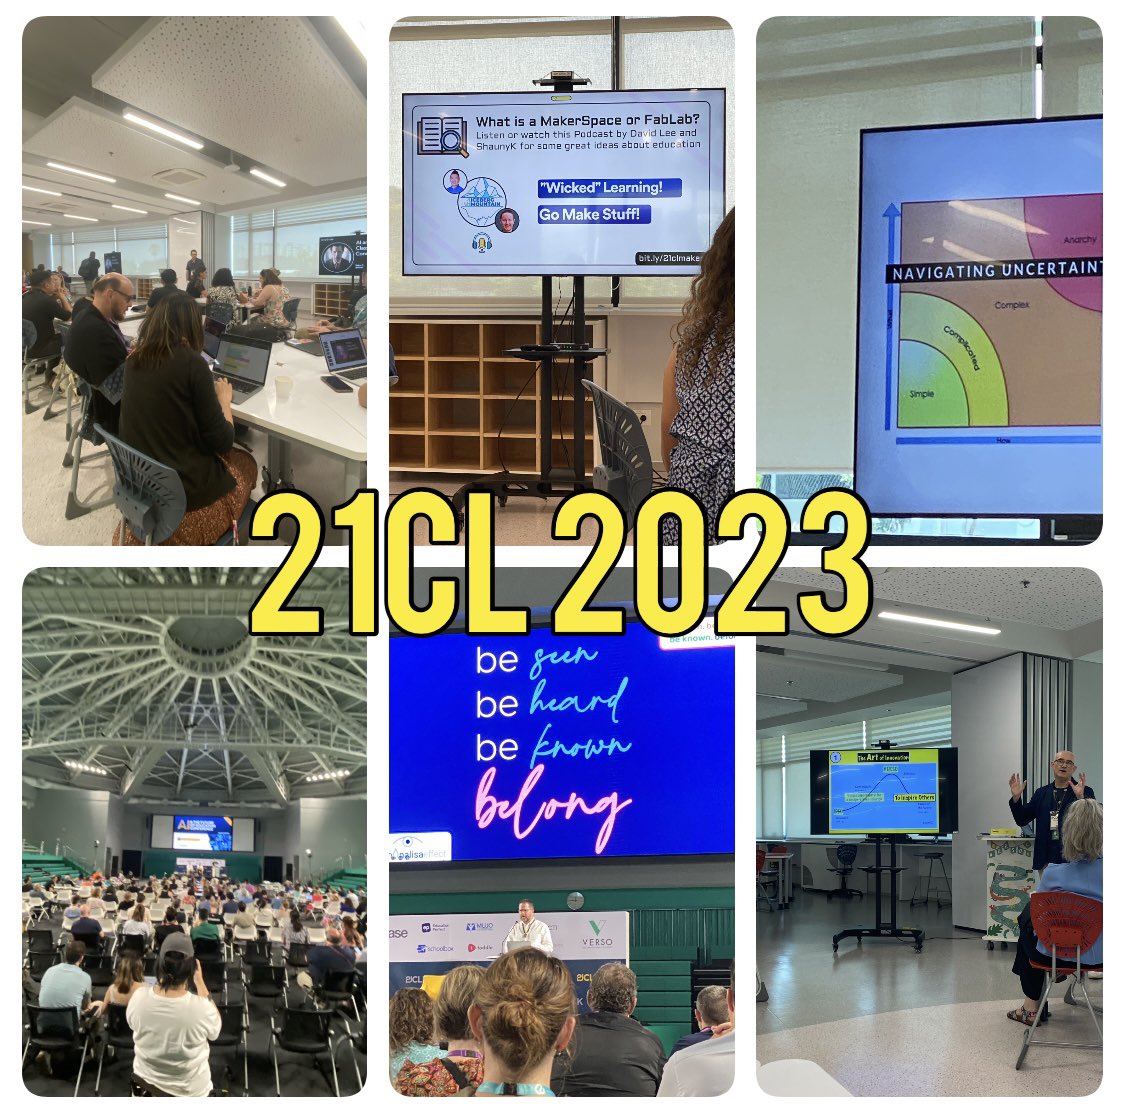 It is essential that we grow and learn to help students be college and career ready for the 21st Century. @21cli #21clbkk numerous great presenters helped us do just that @SmithRChris @stevekatz @desertclimber #monalisaeffect learning about Data, Ai, SEL digital well-being. 🙏